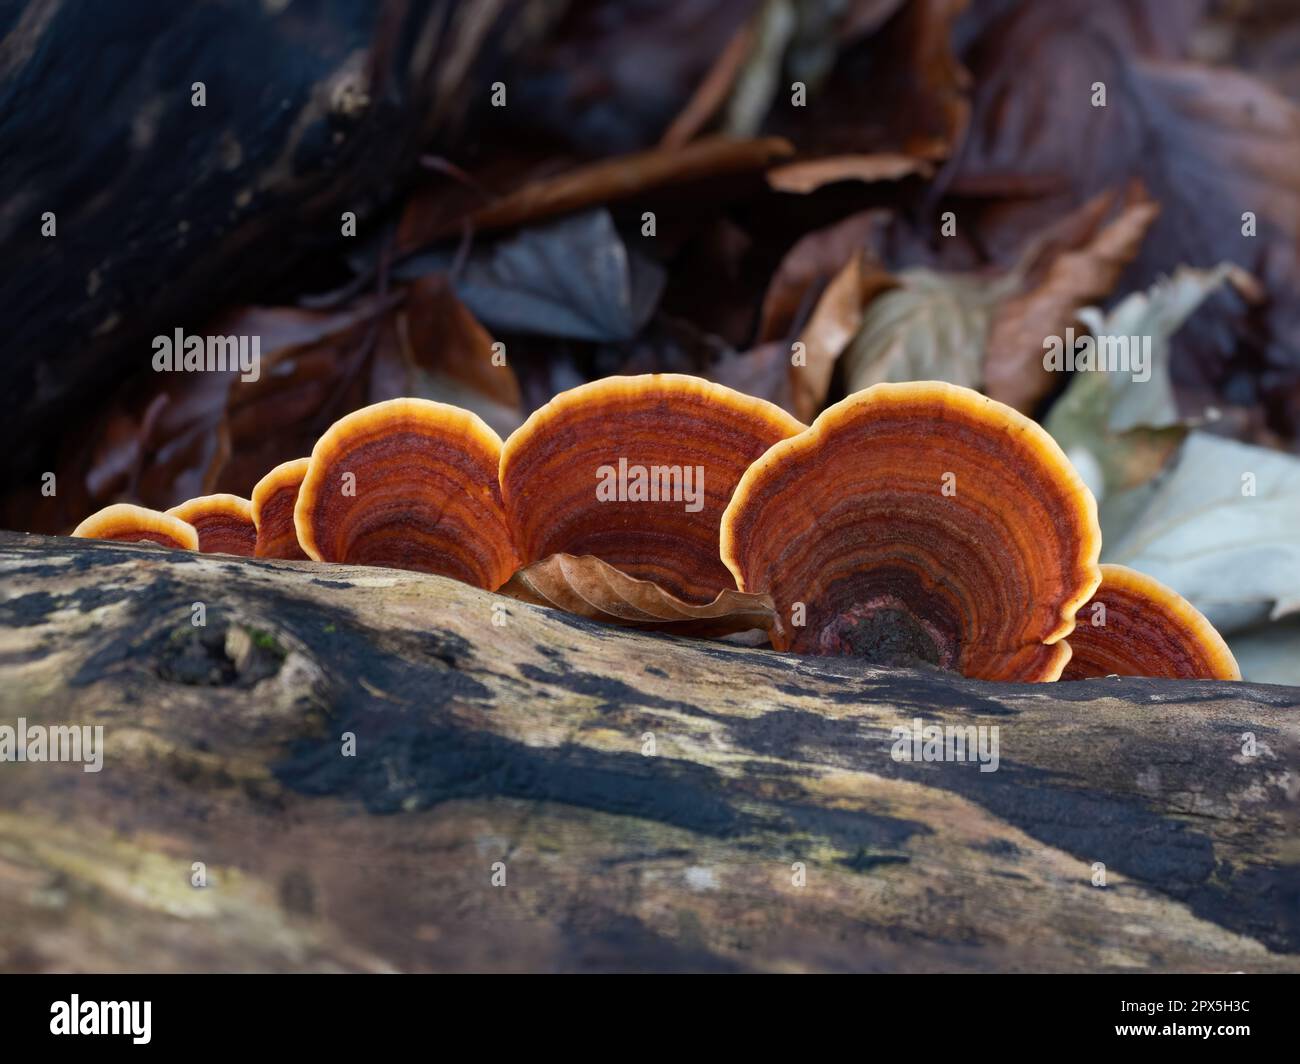 Turkeytail Fungus on Decaying Tree in English Woodland Stock Photo